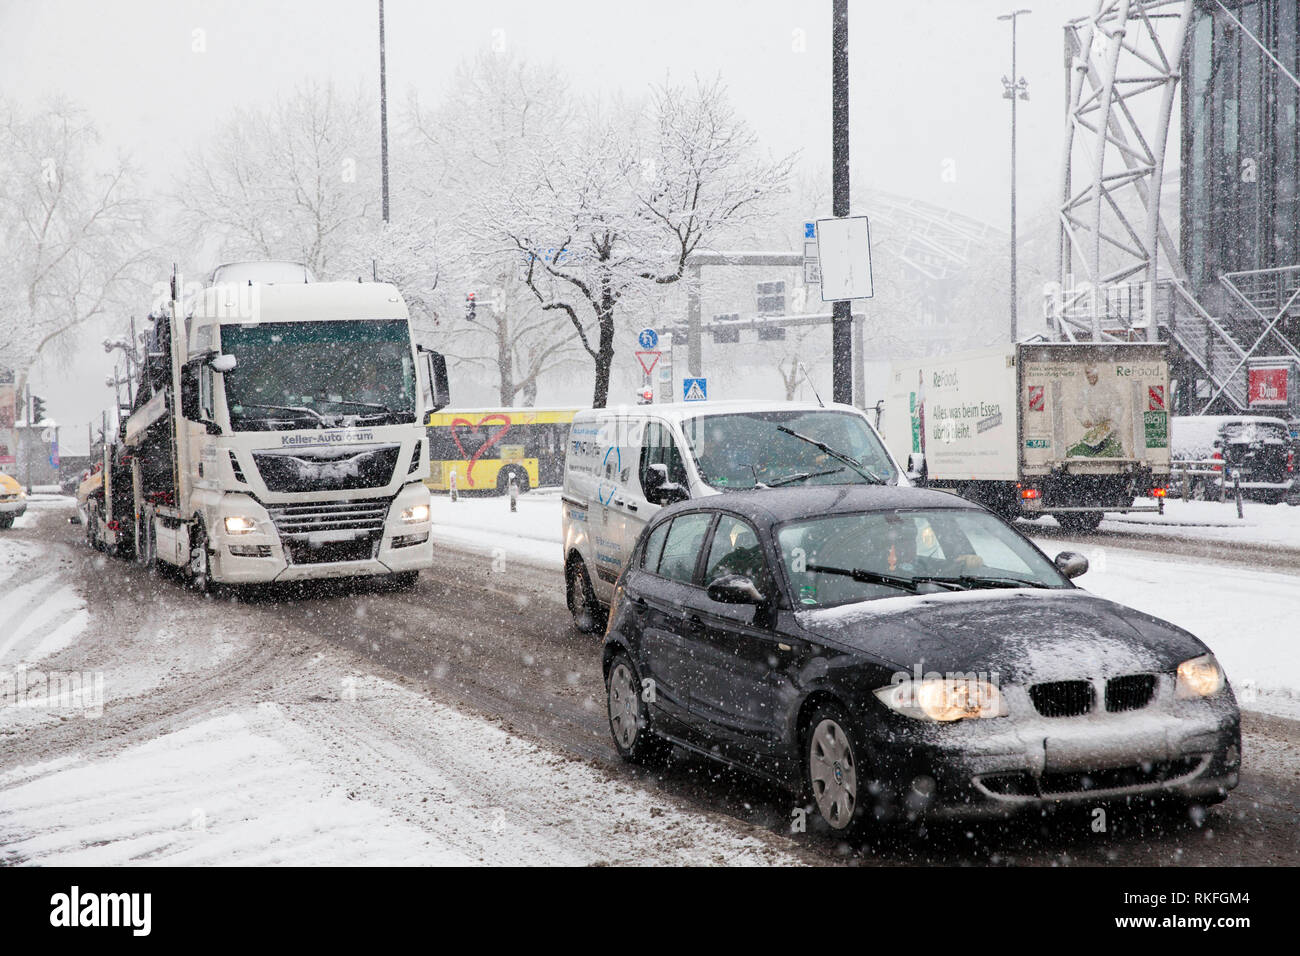 traffic during heavy snowfall on the street Goldgasse, snow, winter, Cologne, Germany.  Verkehr bei starkem Schneefall in der Goldgasse, Schnee, Winte Stock Photo